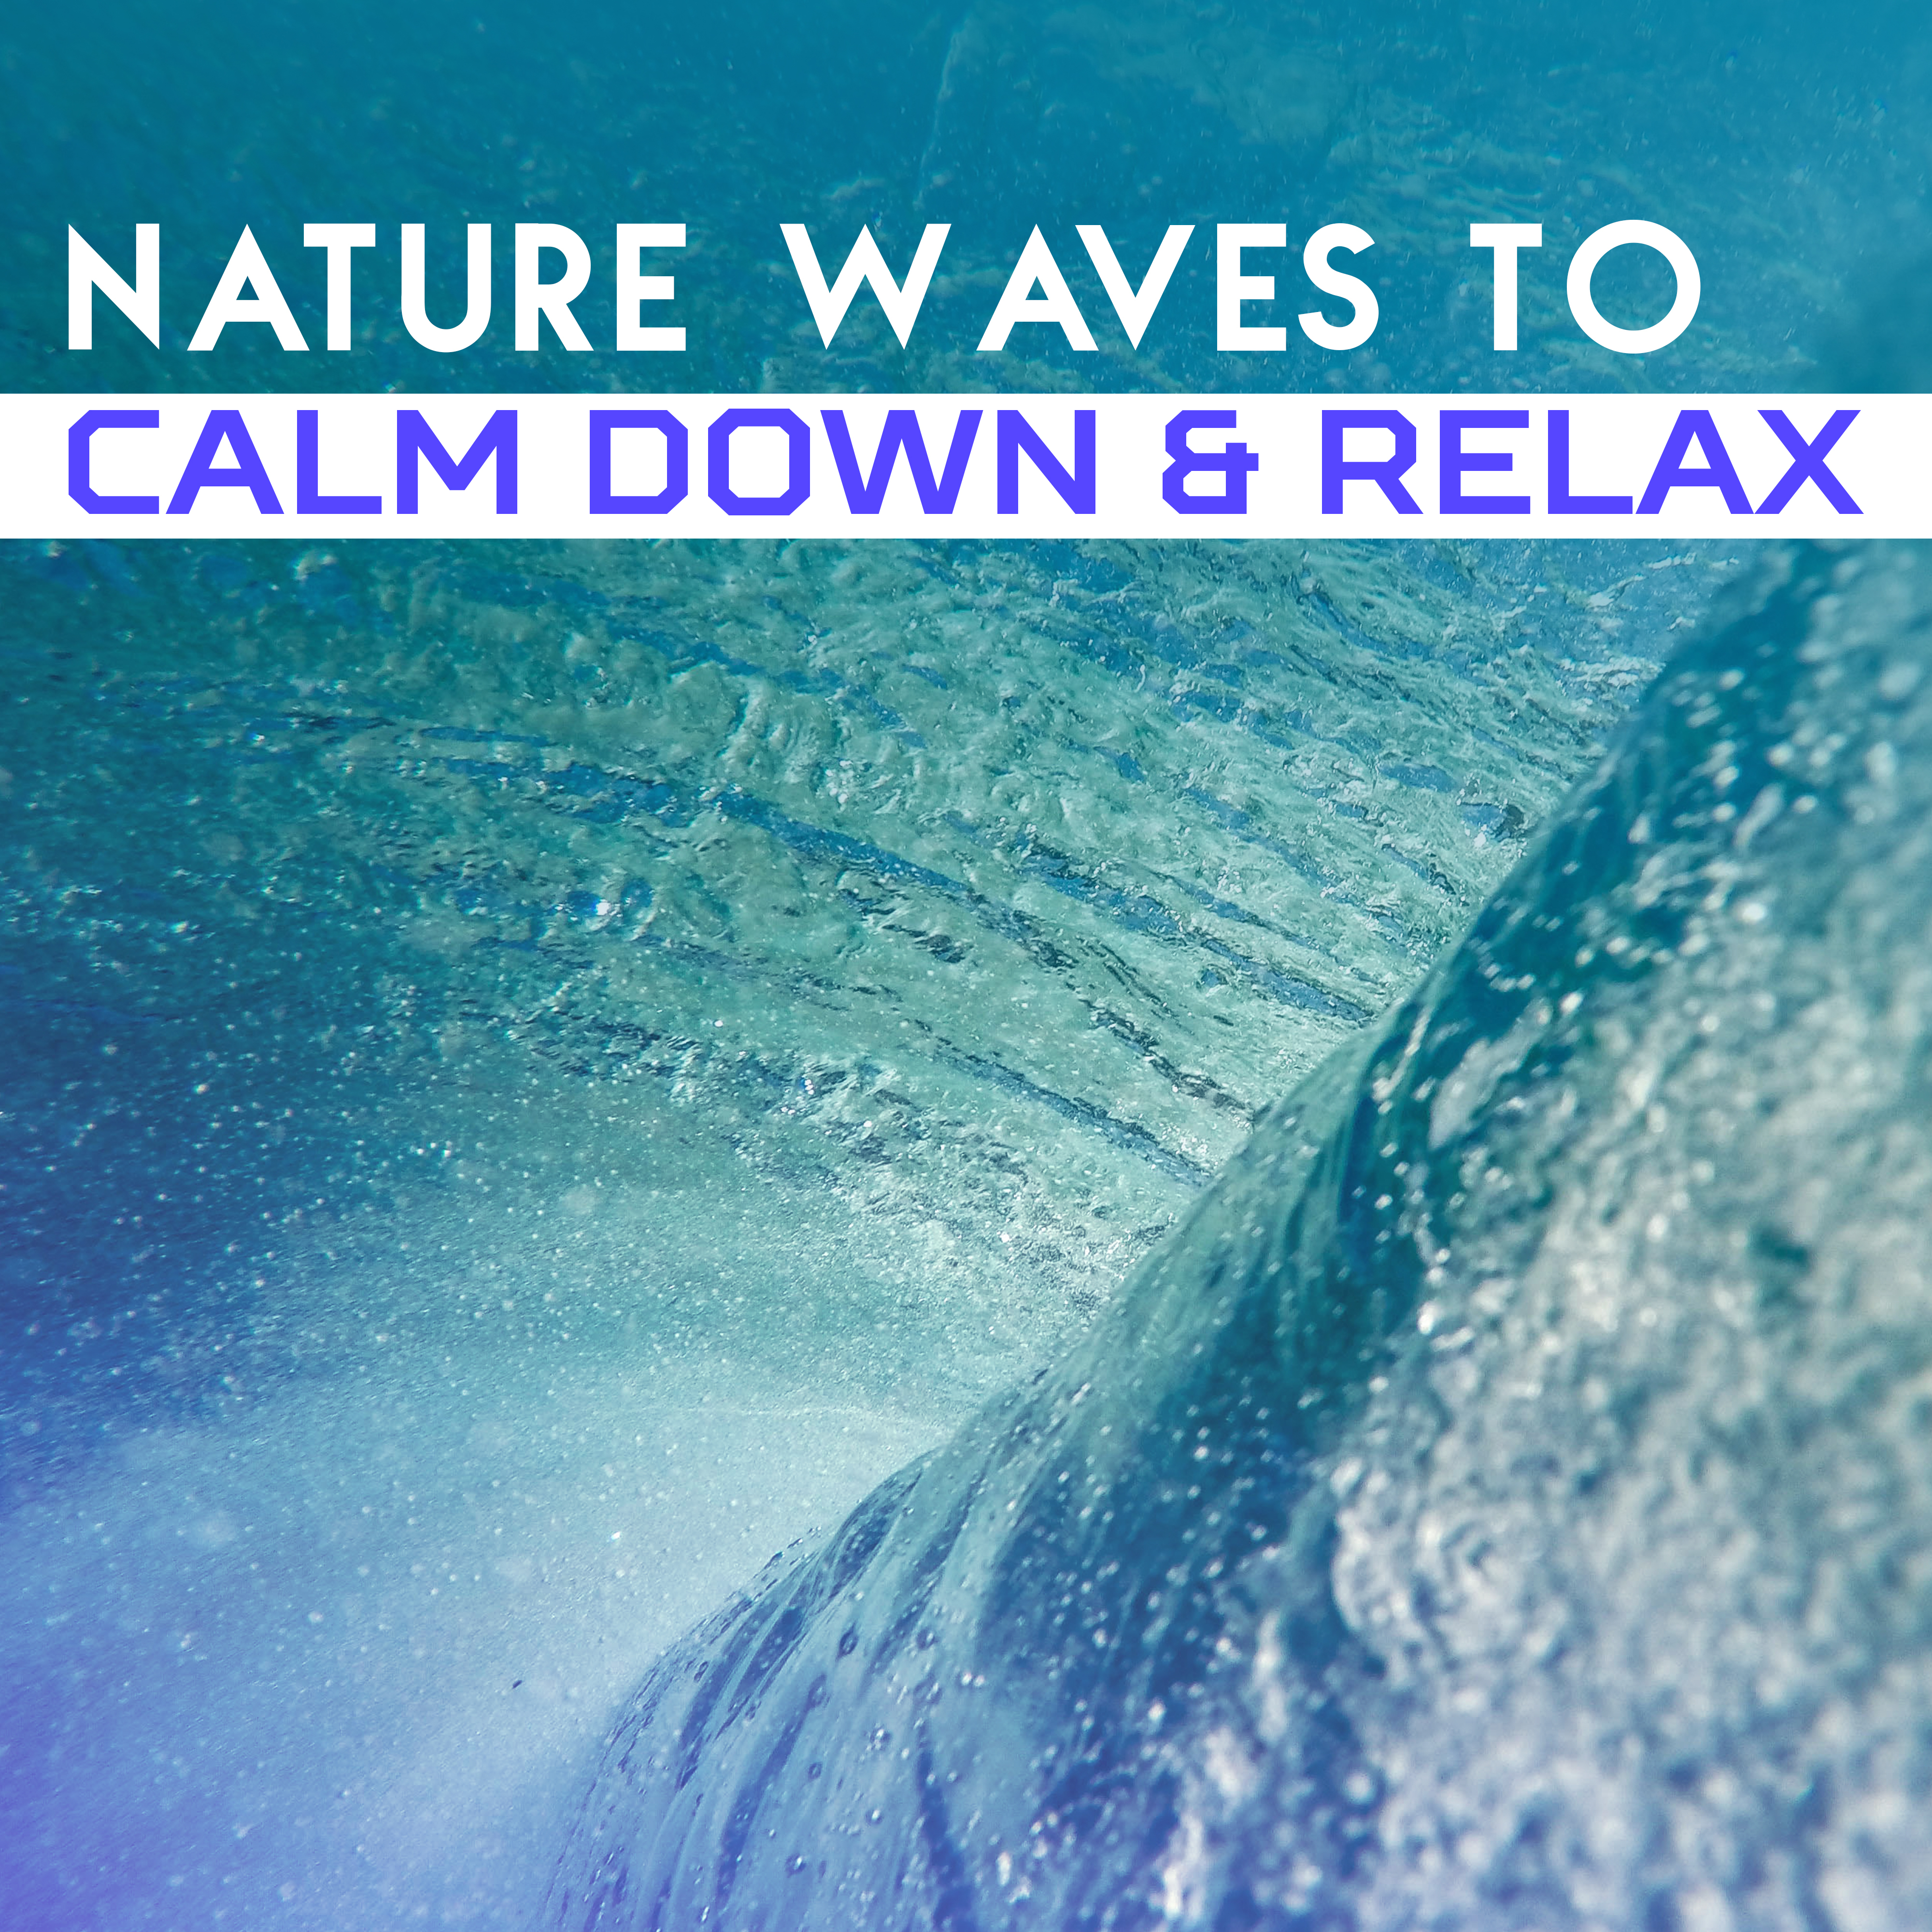 Nature Waves to Calm Down  Relax  Sounds for Mind Calmness, Peaceful New Age Songs, Easy Listening, Rest a Bit